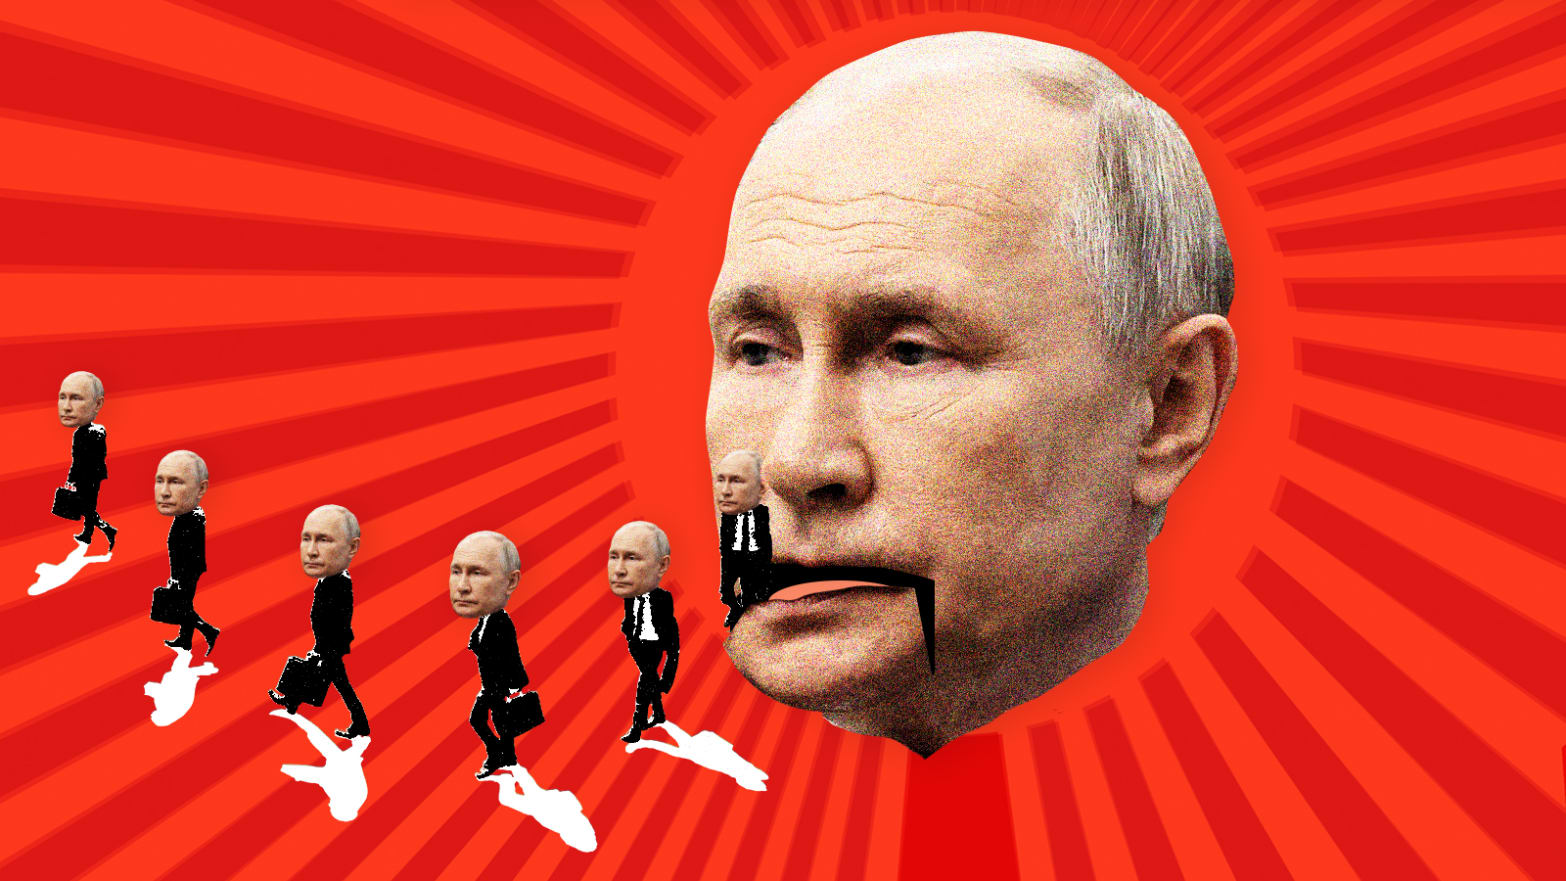 A photo illustration showing a large Putin puppet with small Putin minions trailing out from him.